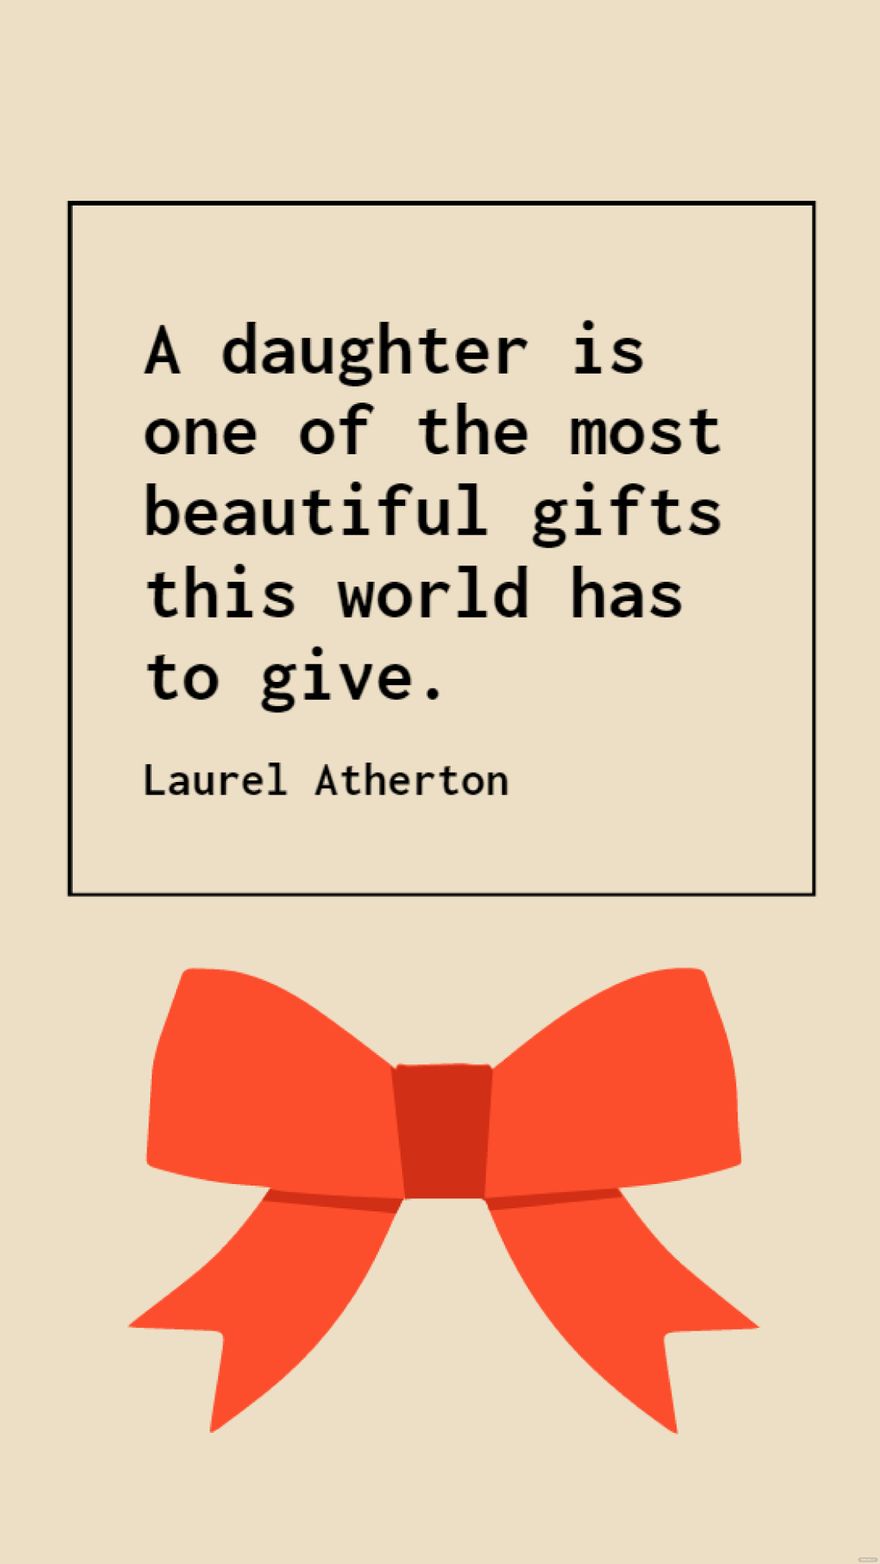 Laurel Atherton - A daughter is one of the most beautiful gifts this world has to give. in JPG